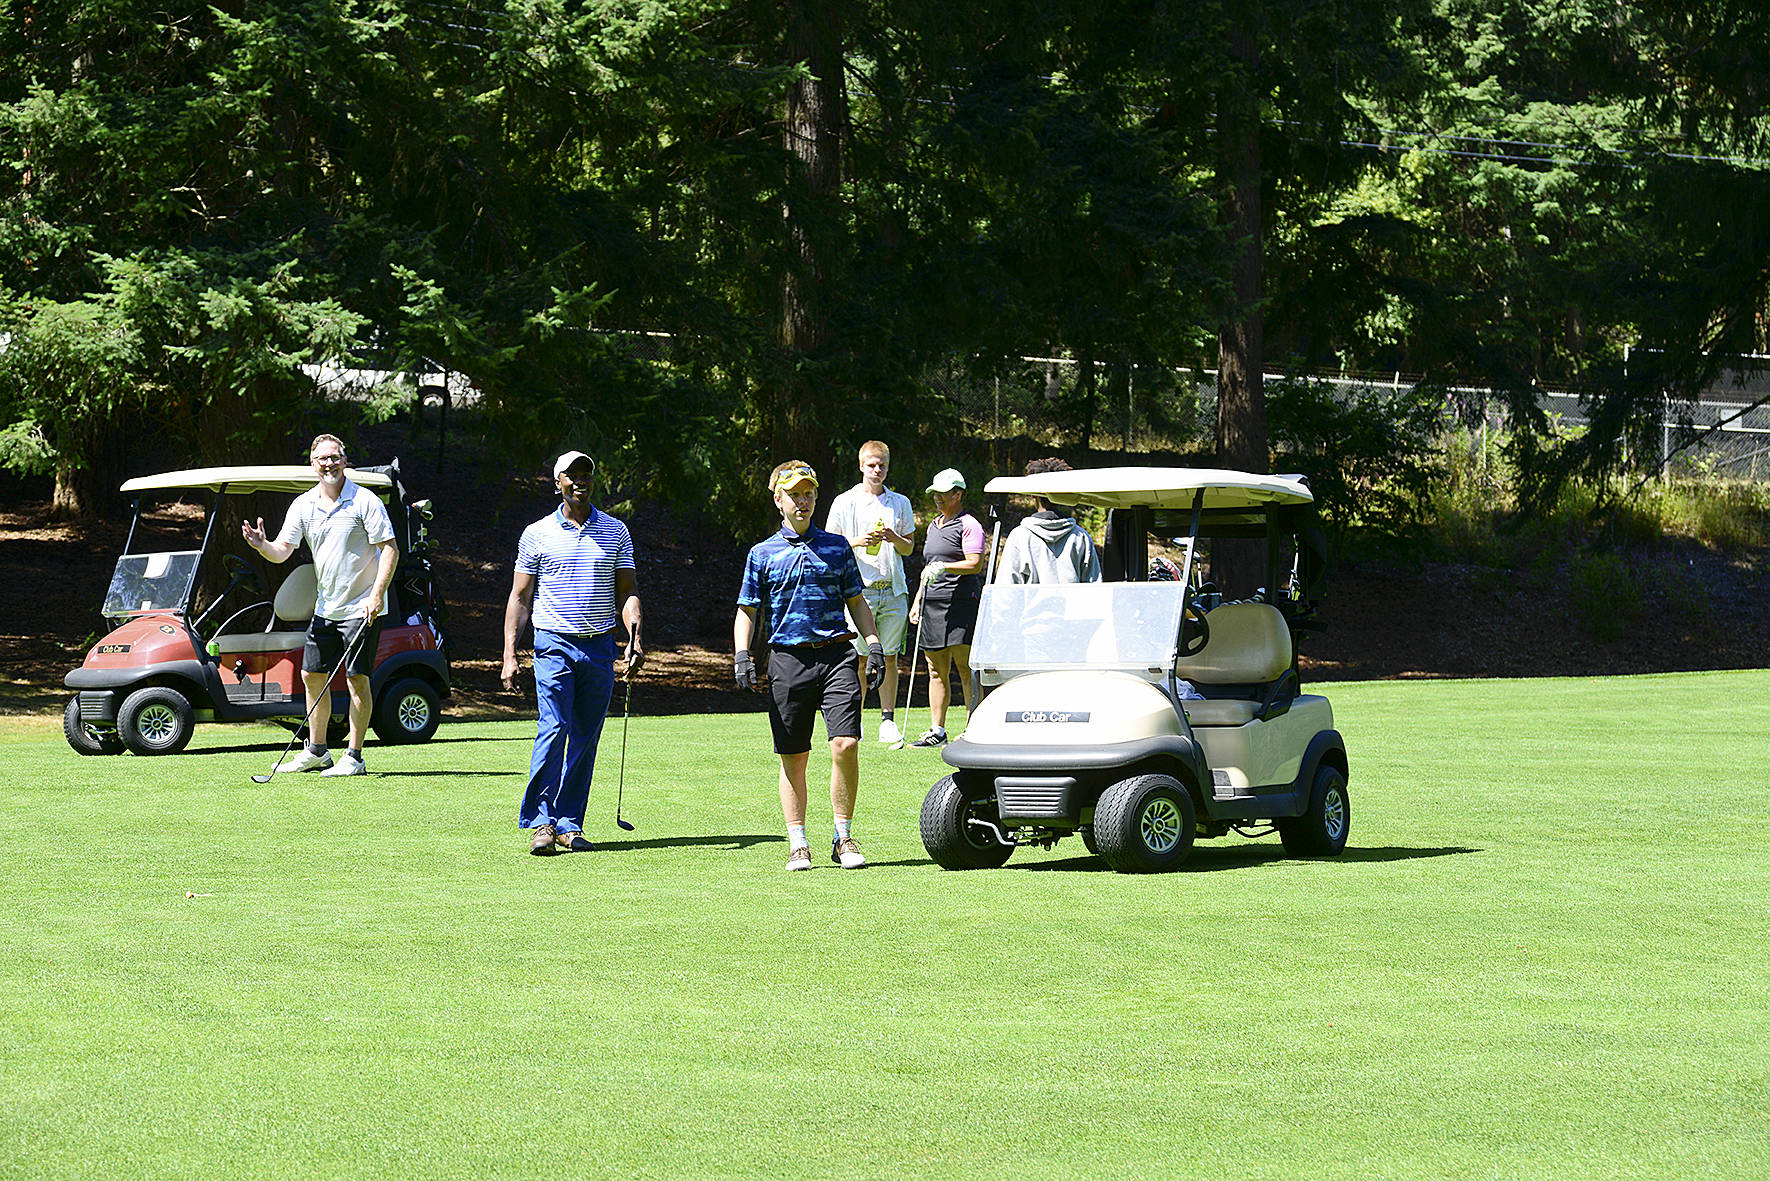 Photo courtesy of Gary Palmer. The 2019 Renton Chamber of Commerce Golf Tournament.